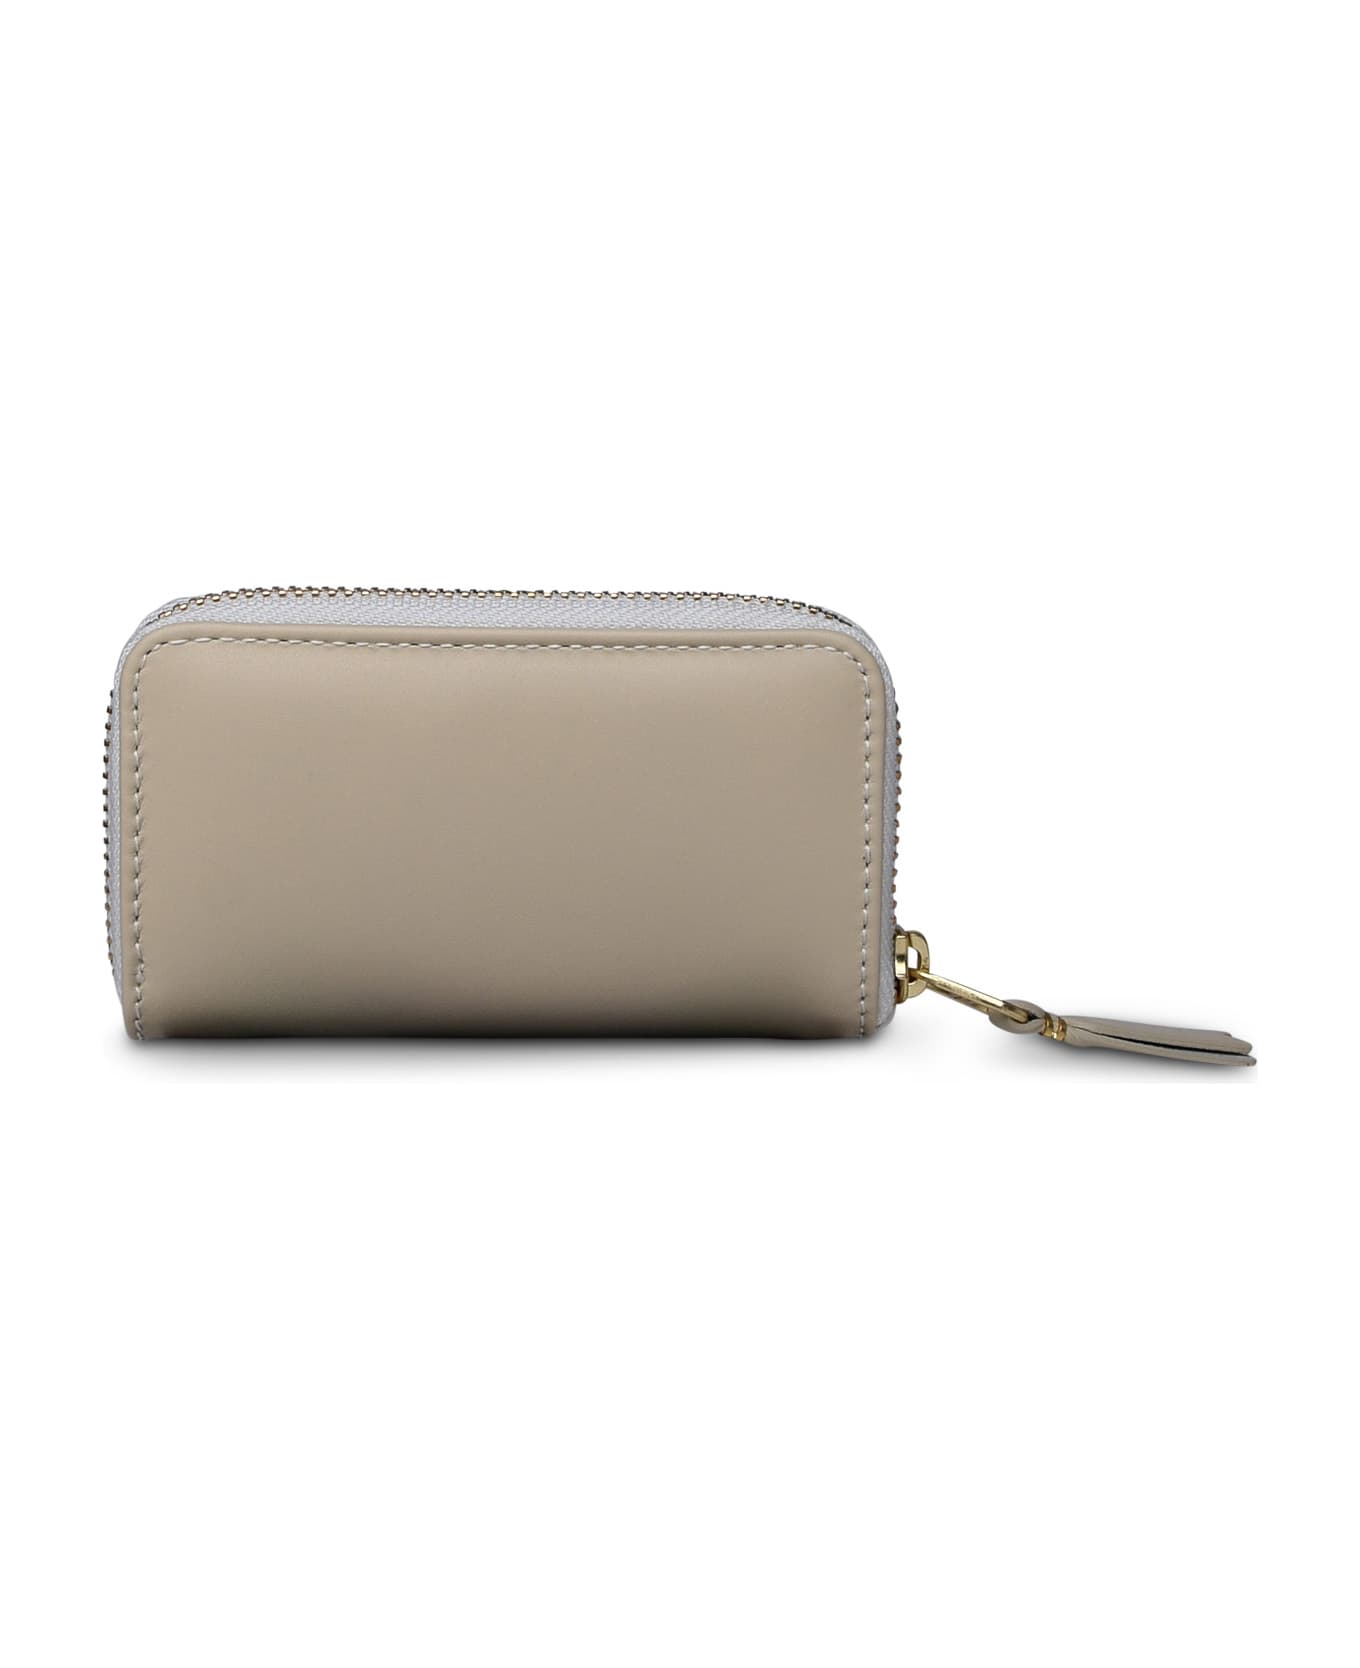 Comme des Garçons Wallet Ivory Leather Purse - Ivory クラッチバッグ